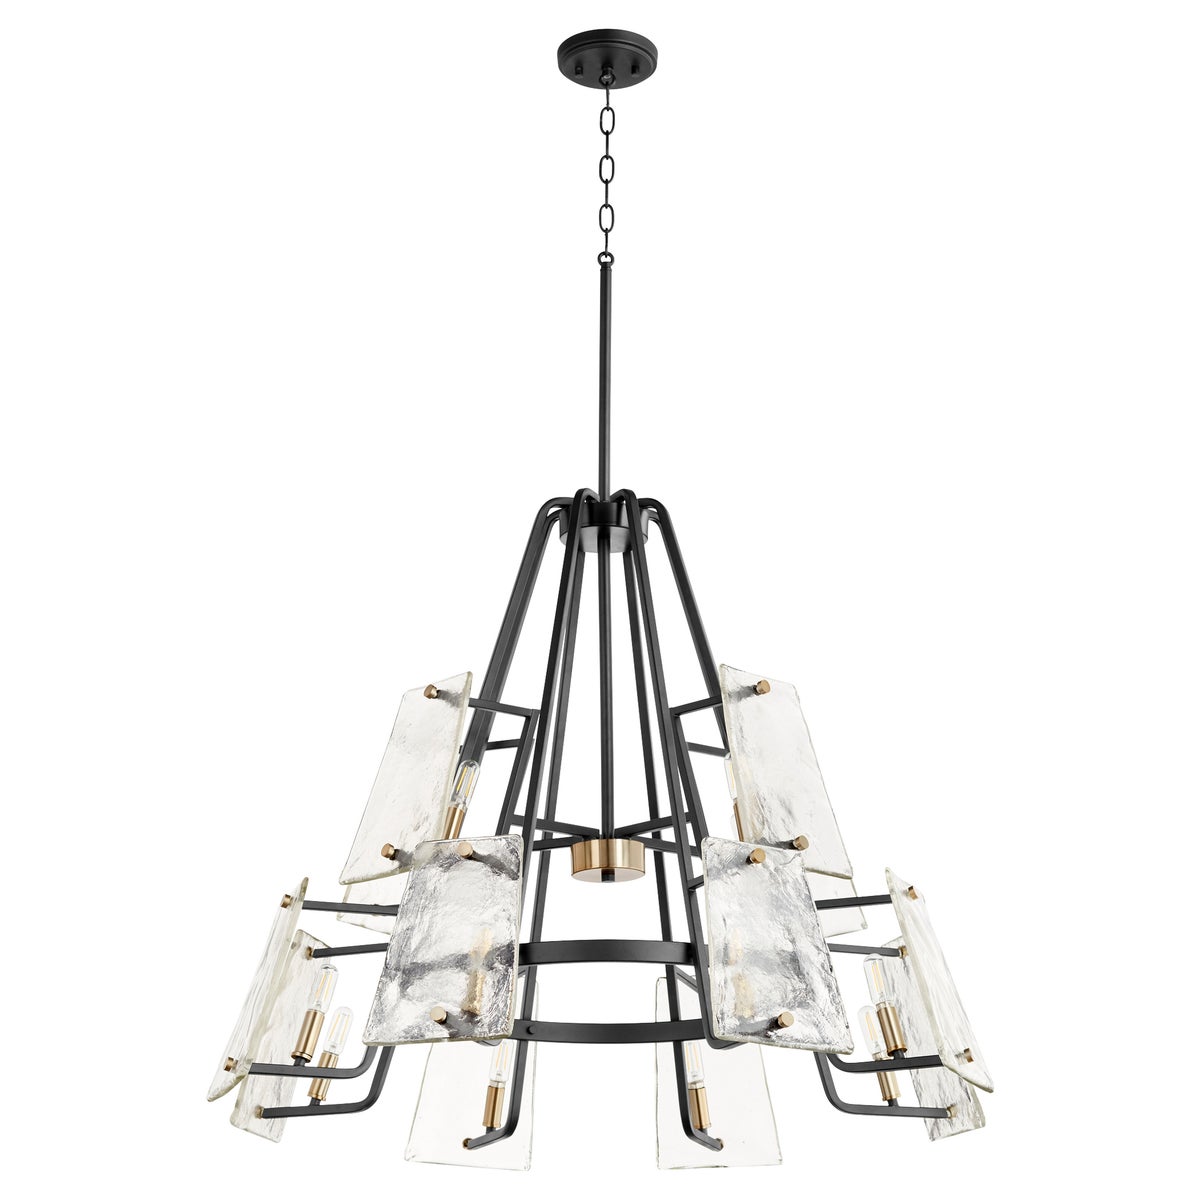 Outdoor chandelier with conical shape, linear framing, and frosted glass trapezoid shades. Mid-century modern design with aged brass-noir finish. Suspended from chain and stem mounting system. Suitable for covered outdoor spaces. 36&quot;W x 30&quot;H.